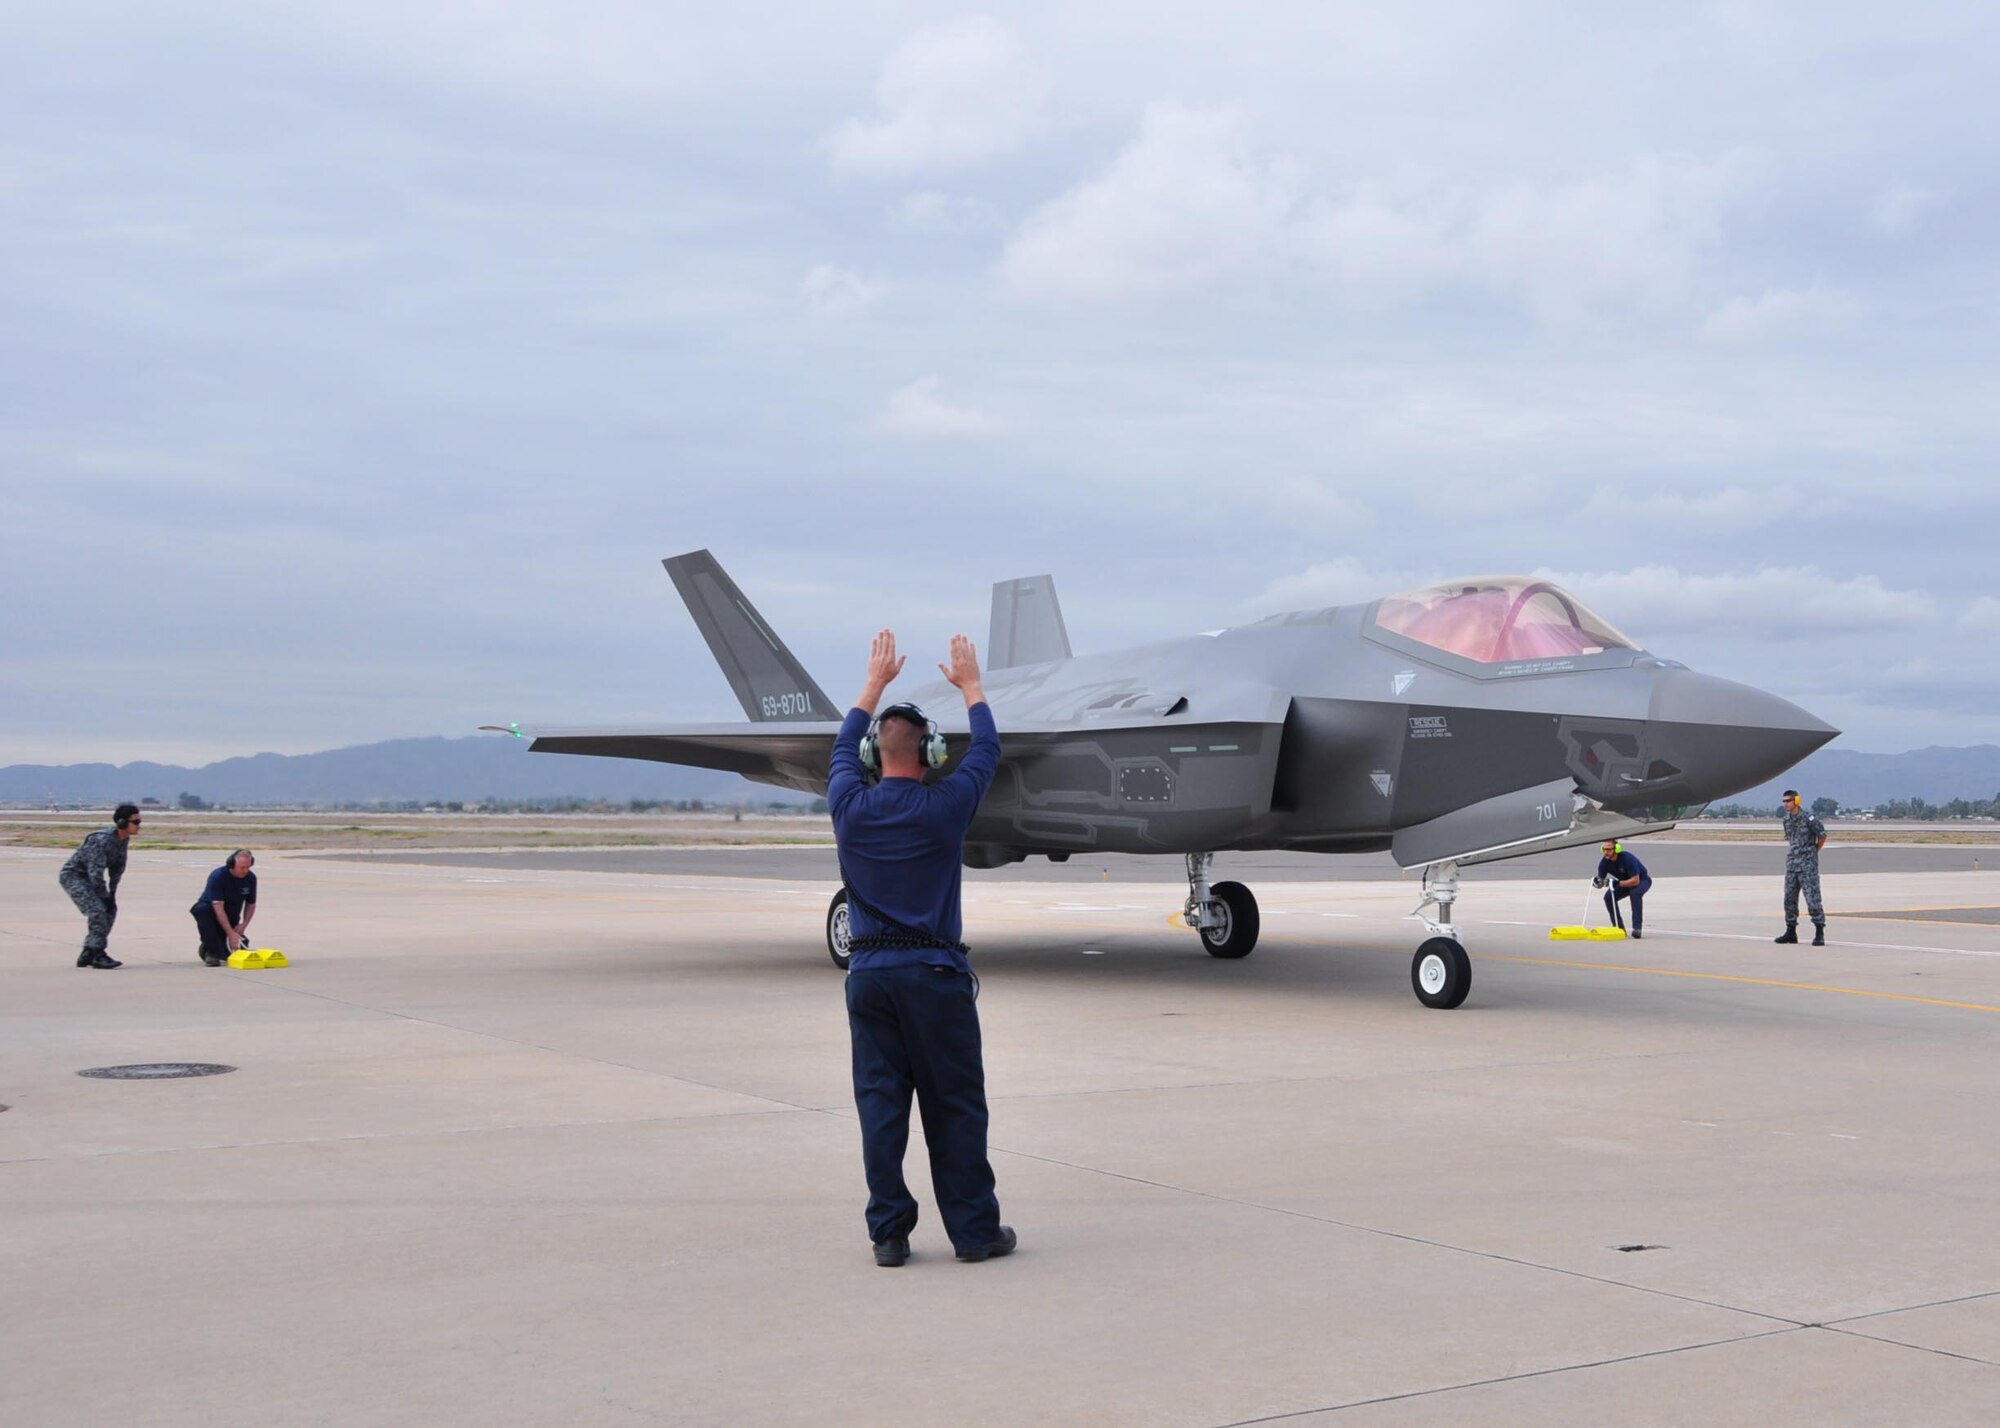 Lockheed Martin and Japanese Air Self-Defense Force personnel work together to taxi in the arrival of the first foreign military sales F-35A onto the 944th Fighter Wing ramp Nov. 28, 2016, at Luke Air Force Base, Ariz. The Air Force Security Assistance and Cooperation Directorate’s Construction Division is responsible for supporting foreign military sales construction projects overseas and ensuring allies have the proper facilities in place for American weapon systems. (U.S. Air Force photo/Tech. Sgt. Louis Vega Jr.)